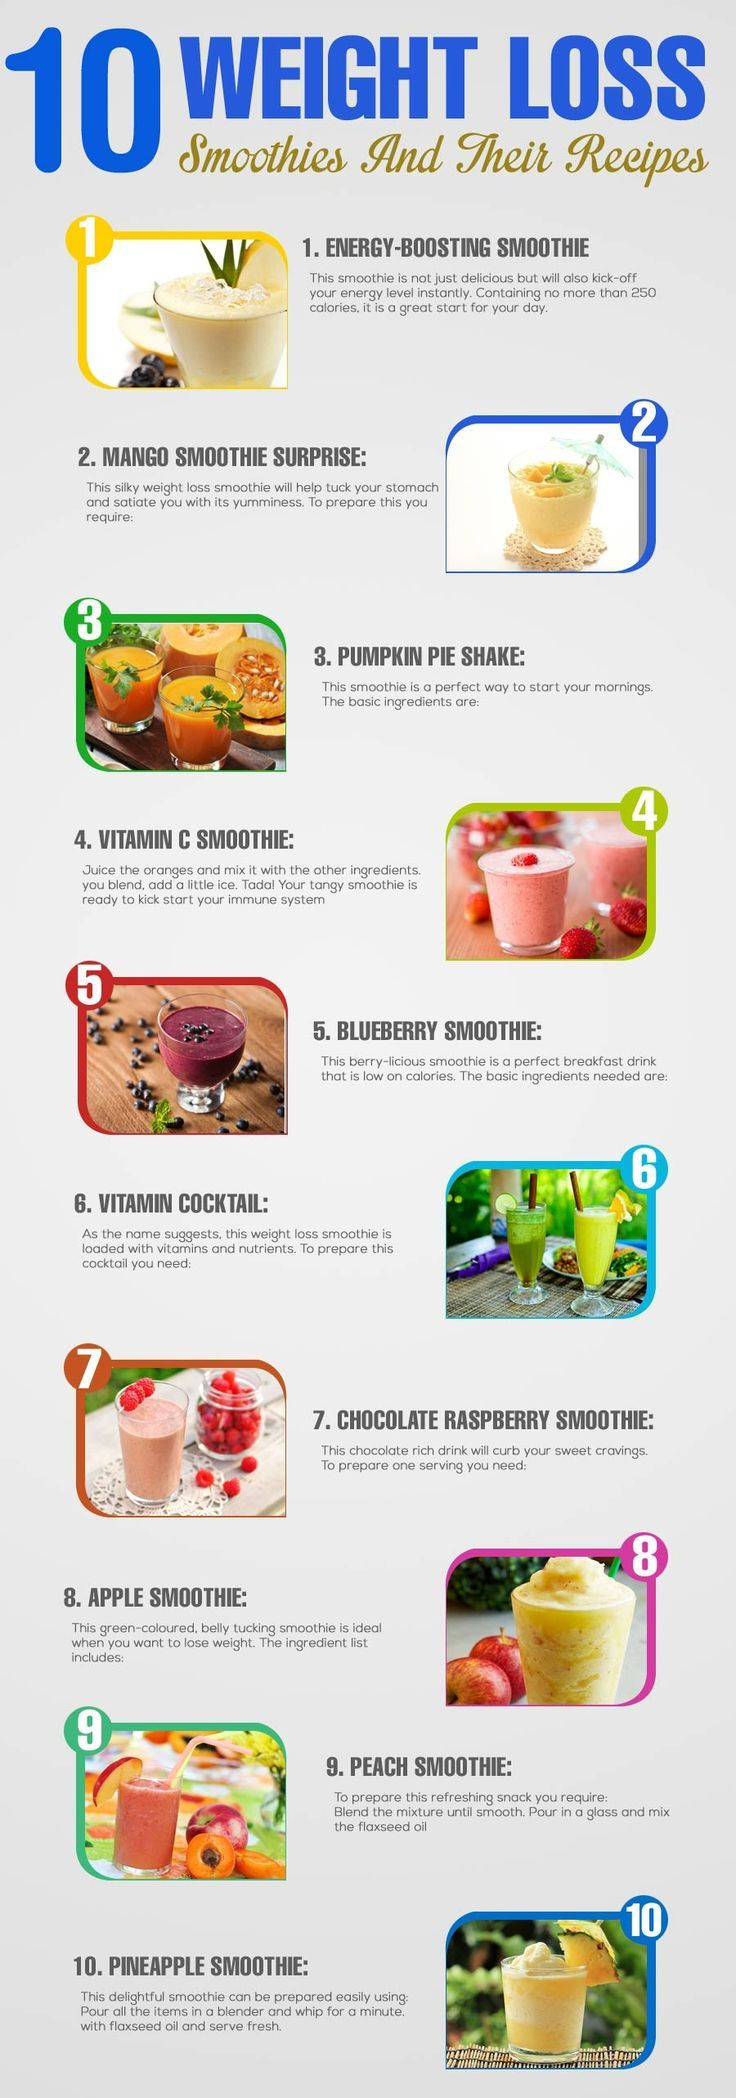 Low Calorie Smoothies Recipes For Weight Loss
 How to make healthy smoothies at home to lose weight